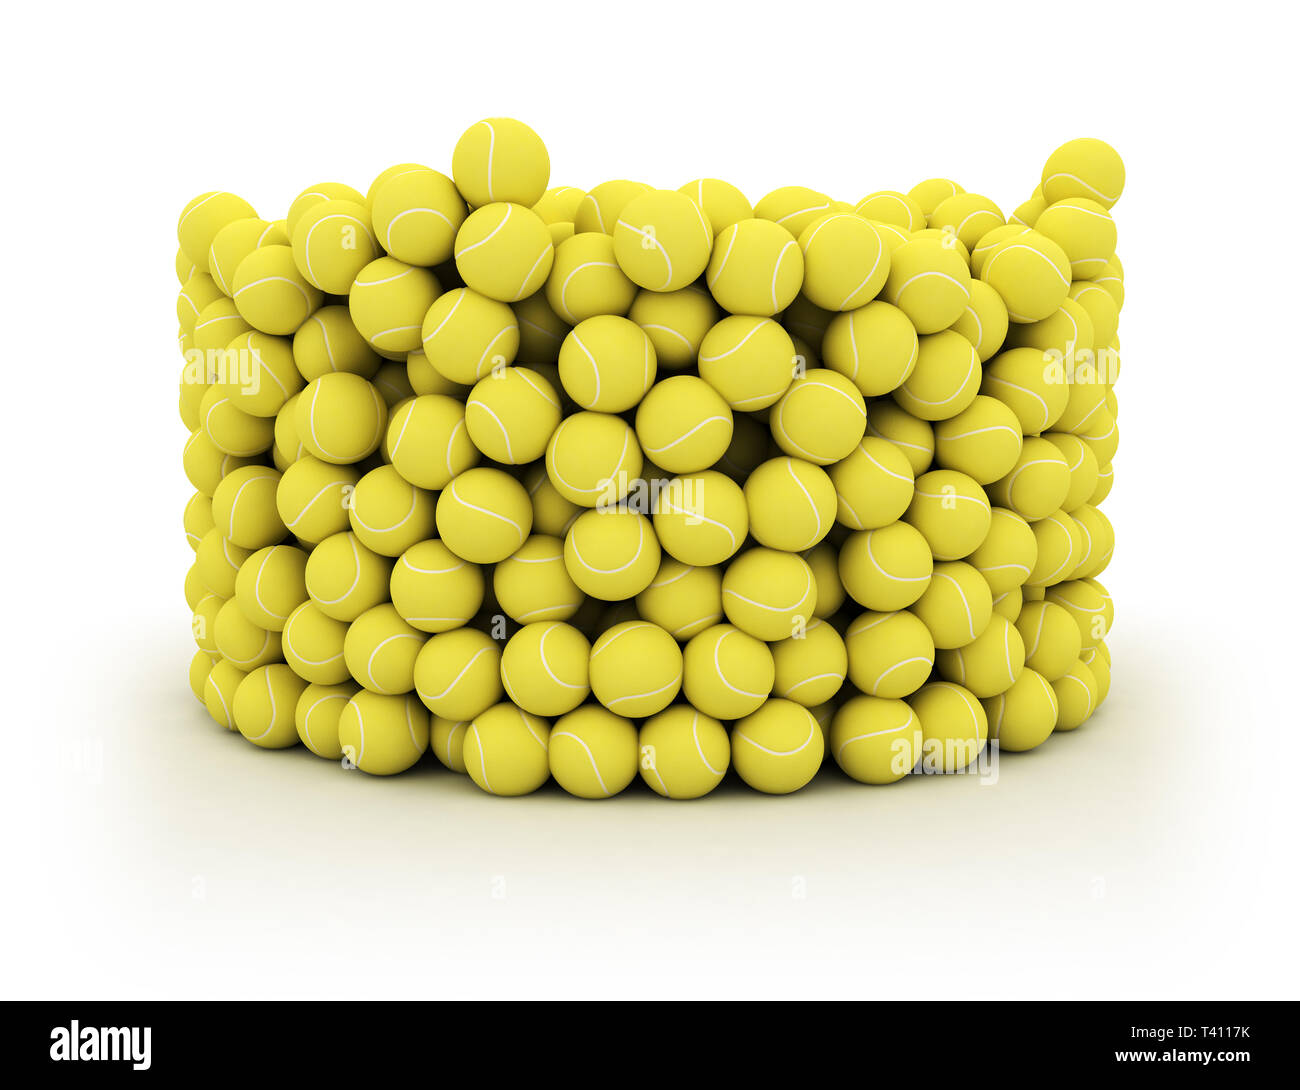 Group of yellow tennis balls in a cyliner bucket shape isolated on white  background Stock Photo - Alamy